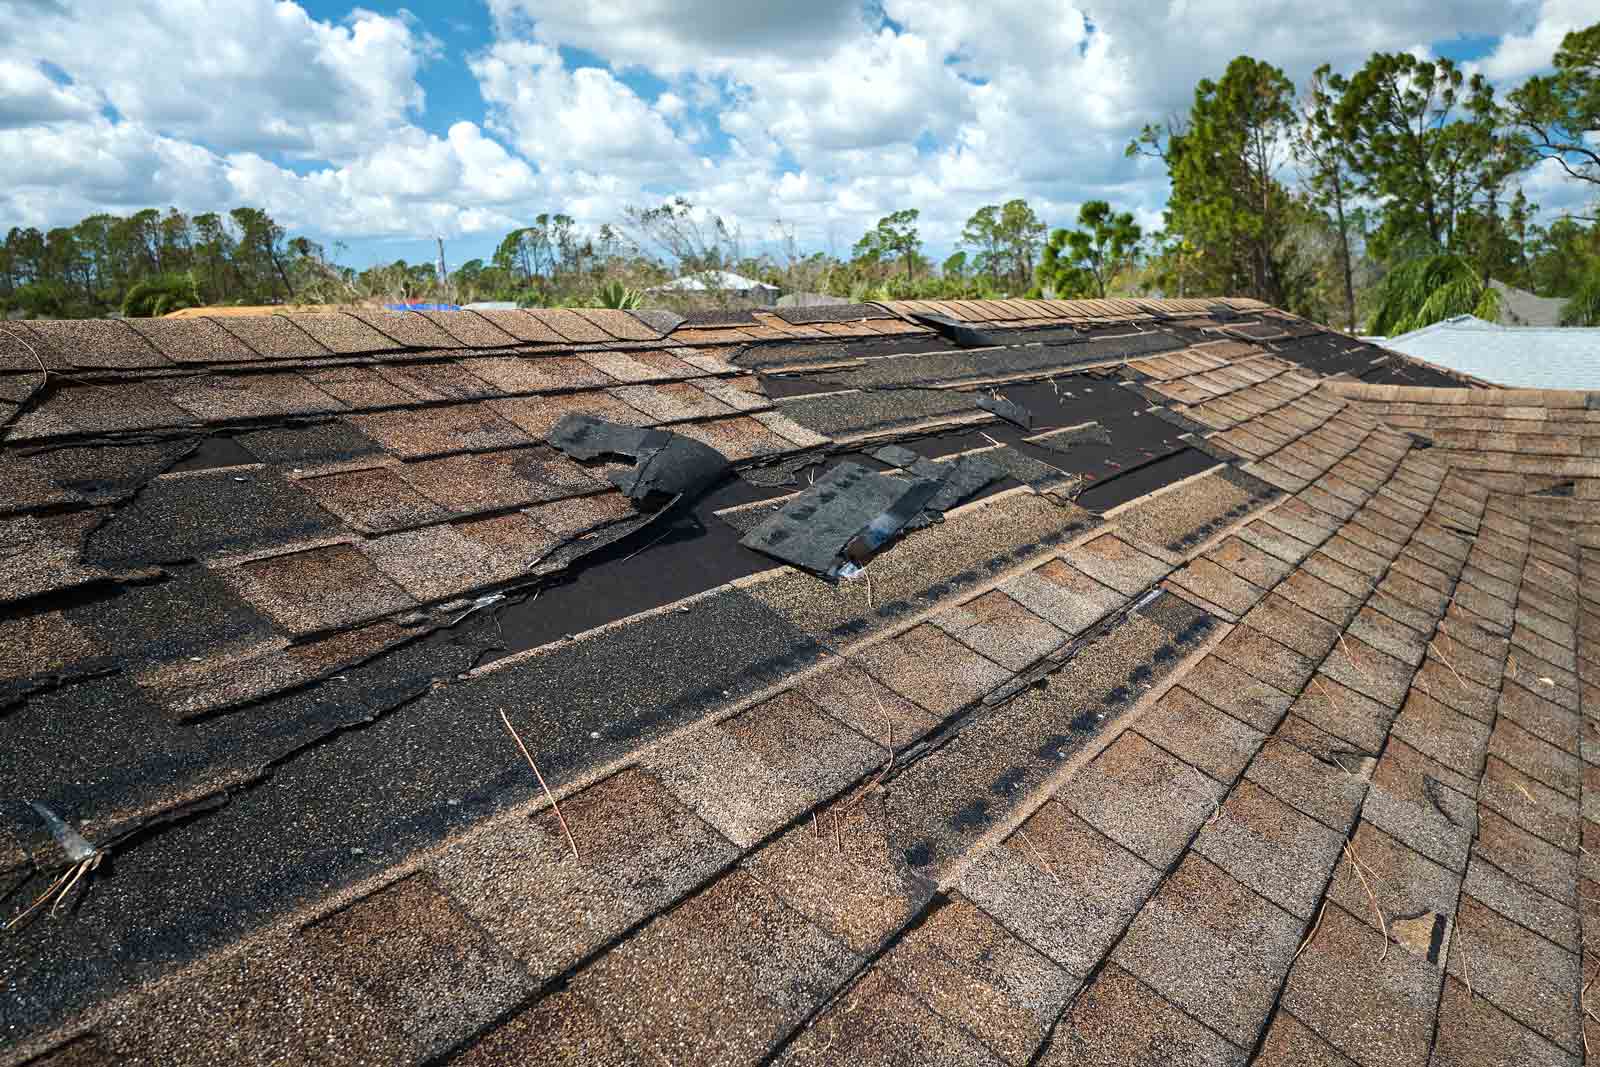 What Can Damage Your Roof? - MLM Home Improvement